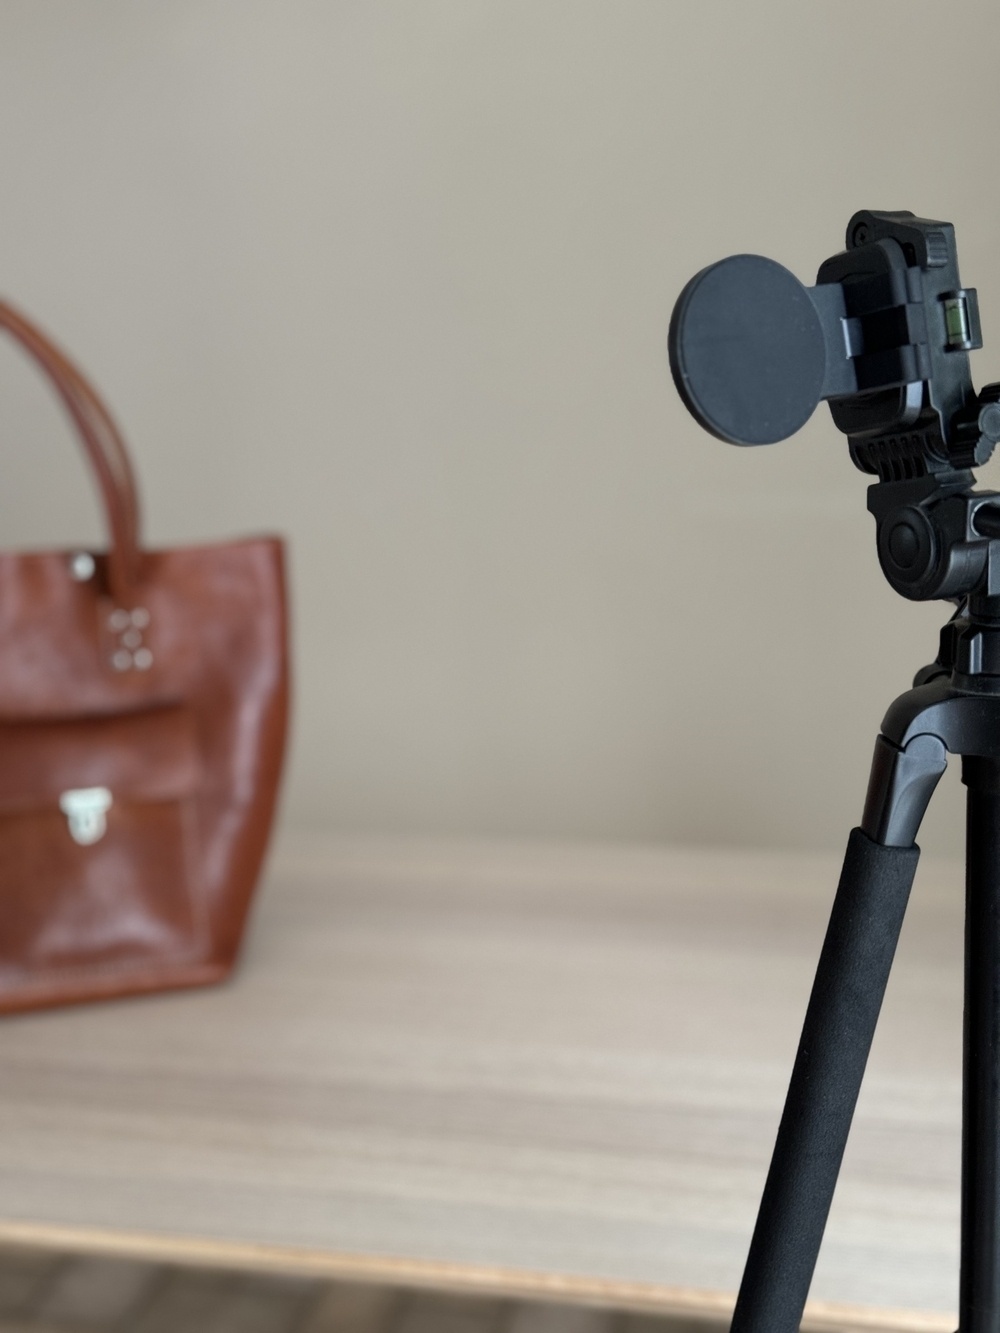 A camera tripod with a device mounted on it is set up indoors near a wooden table with a brown leather bag in the background.